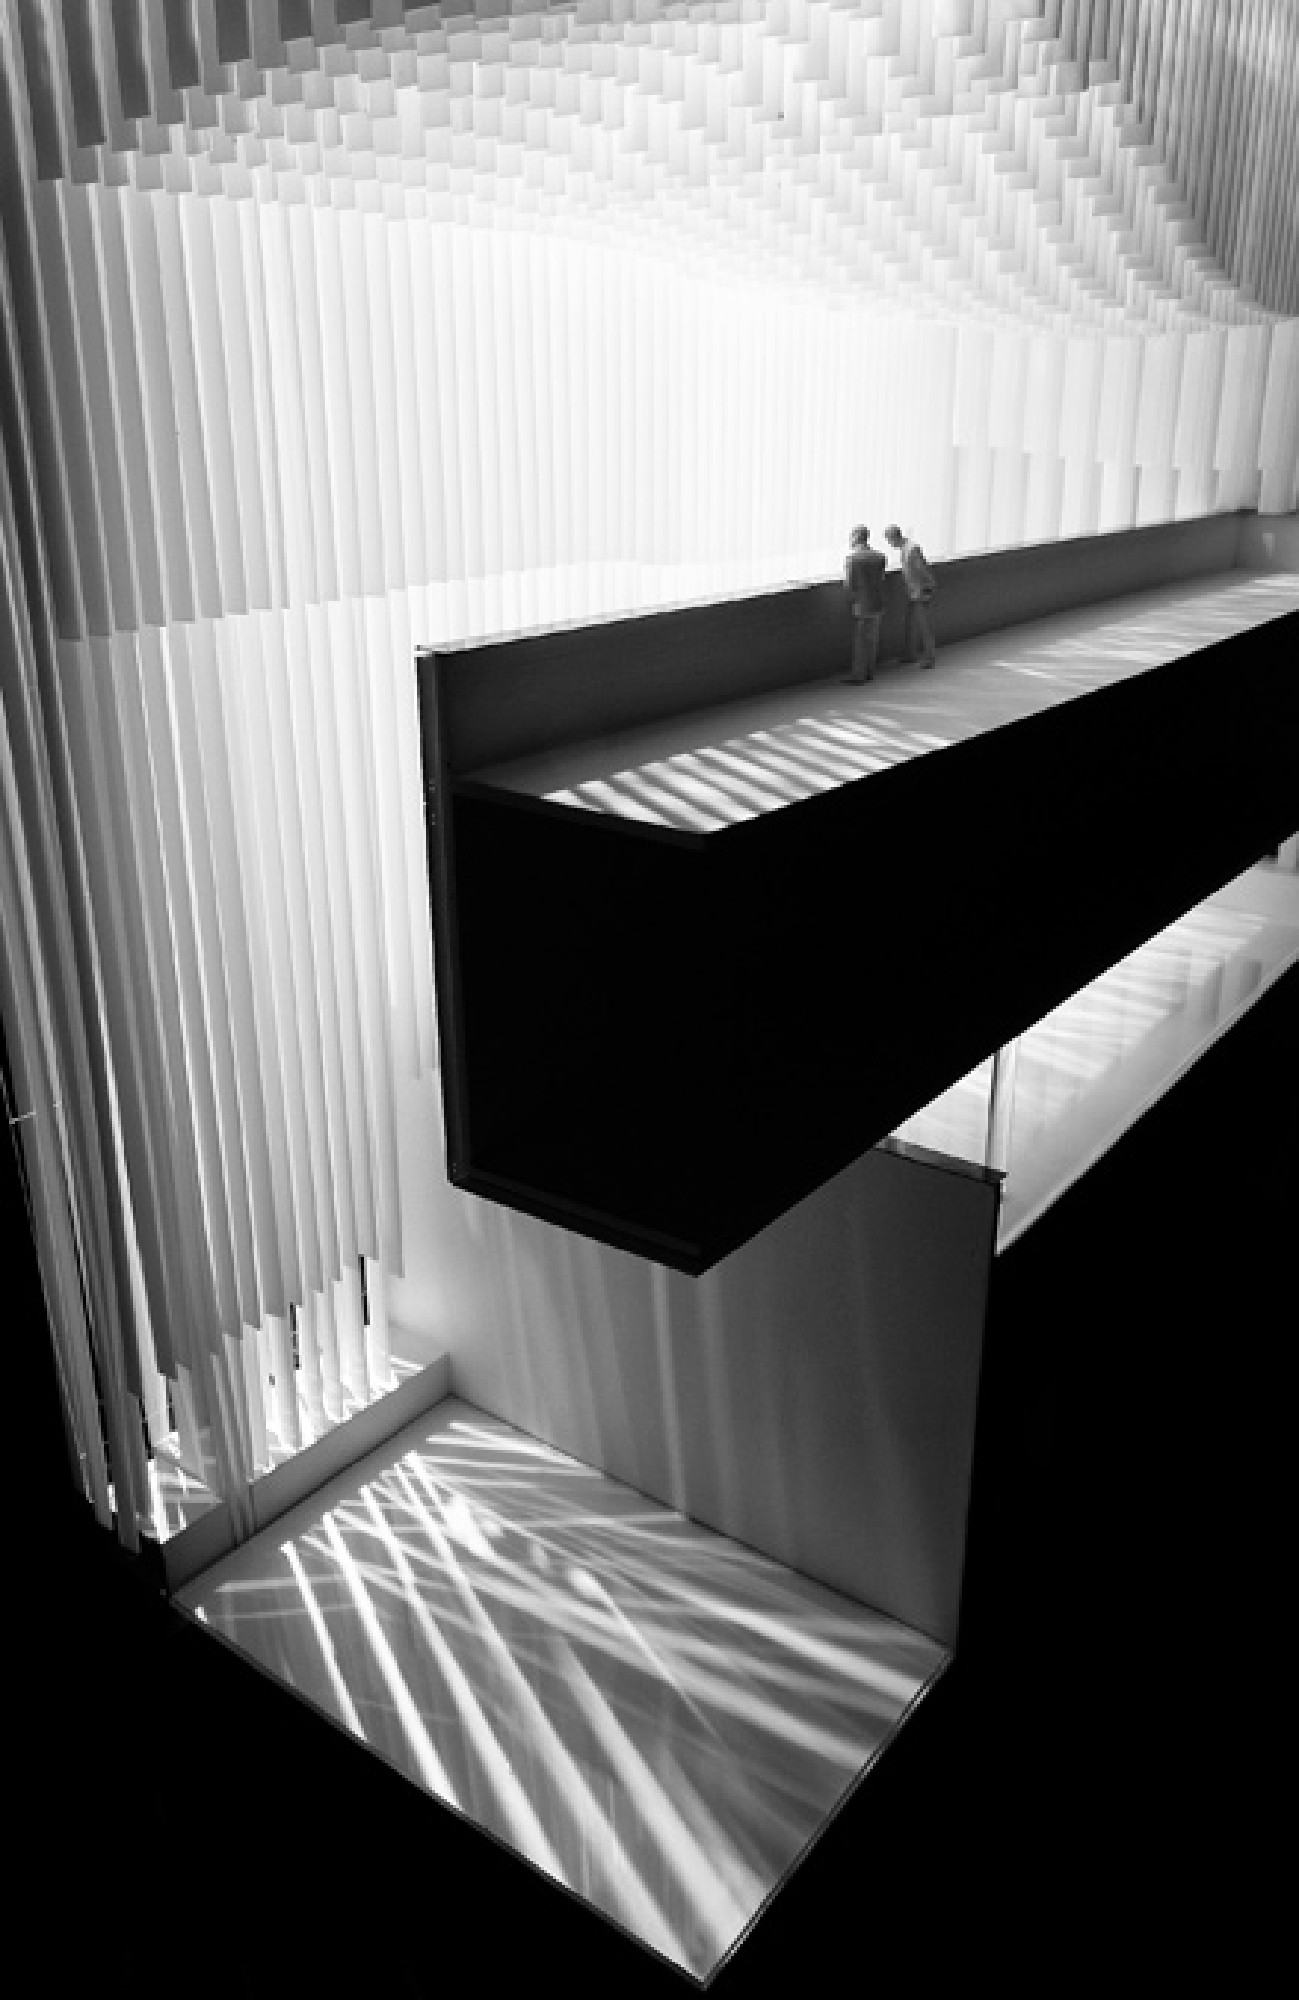 Architectural model photography by architectural Photographer Richard Stonehouse.